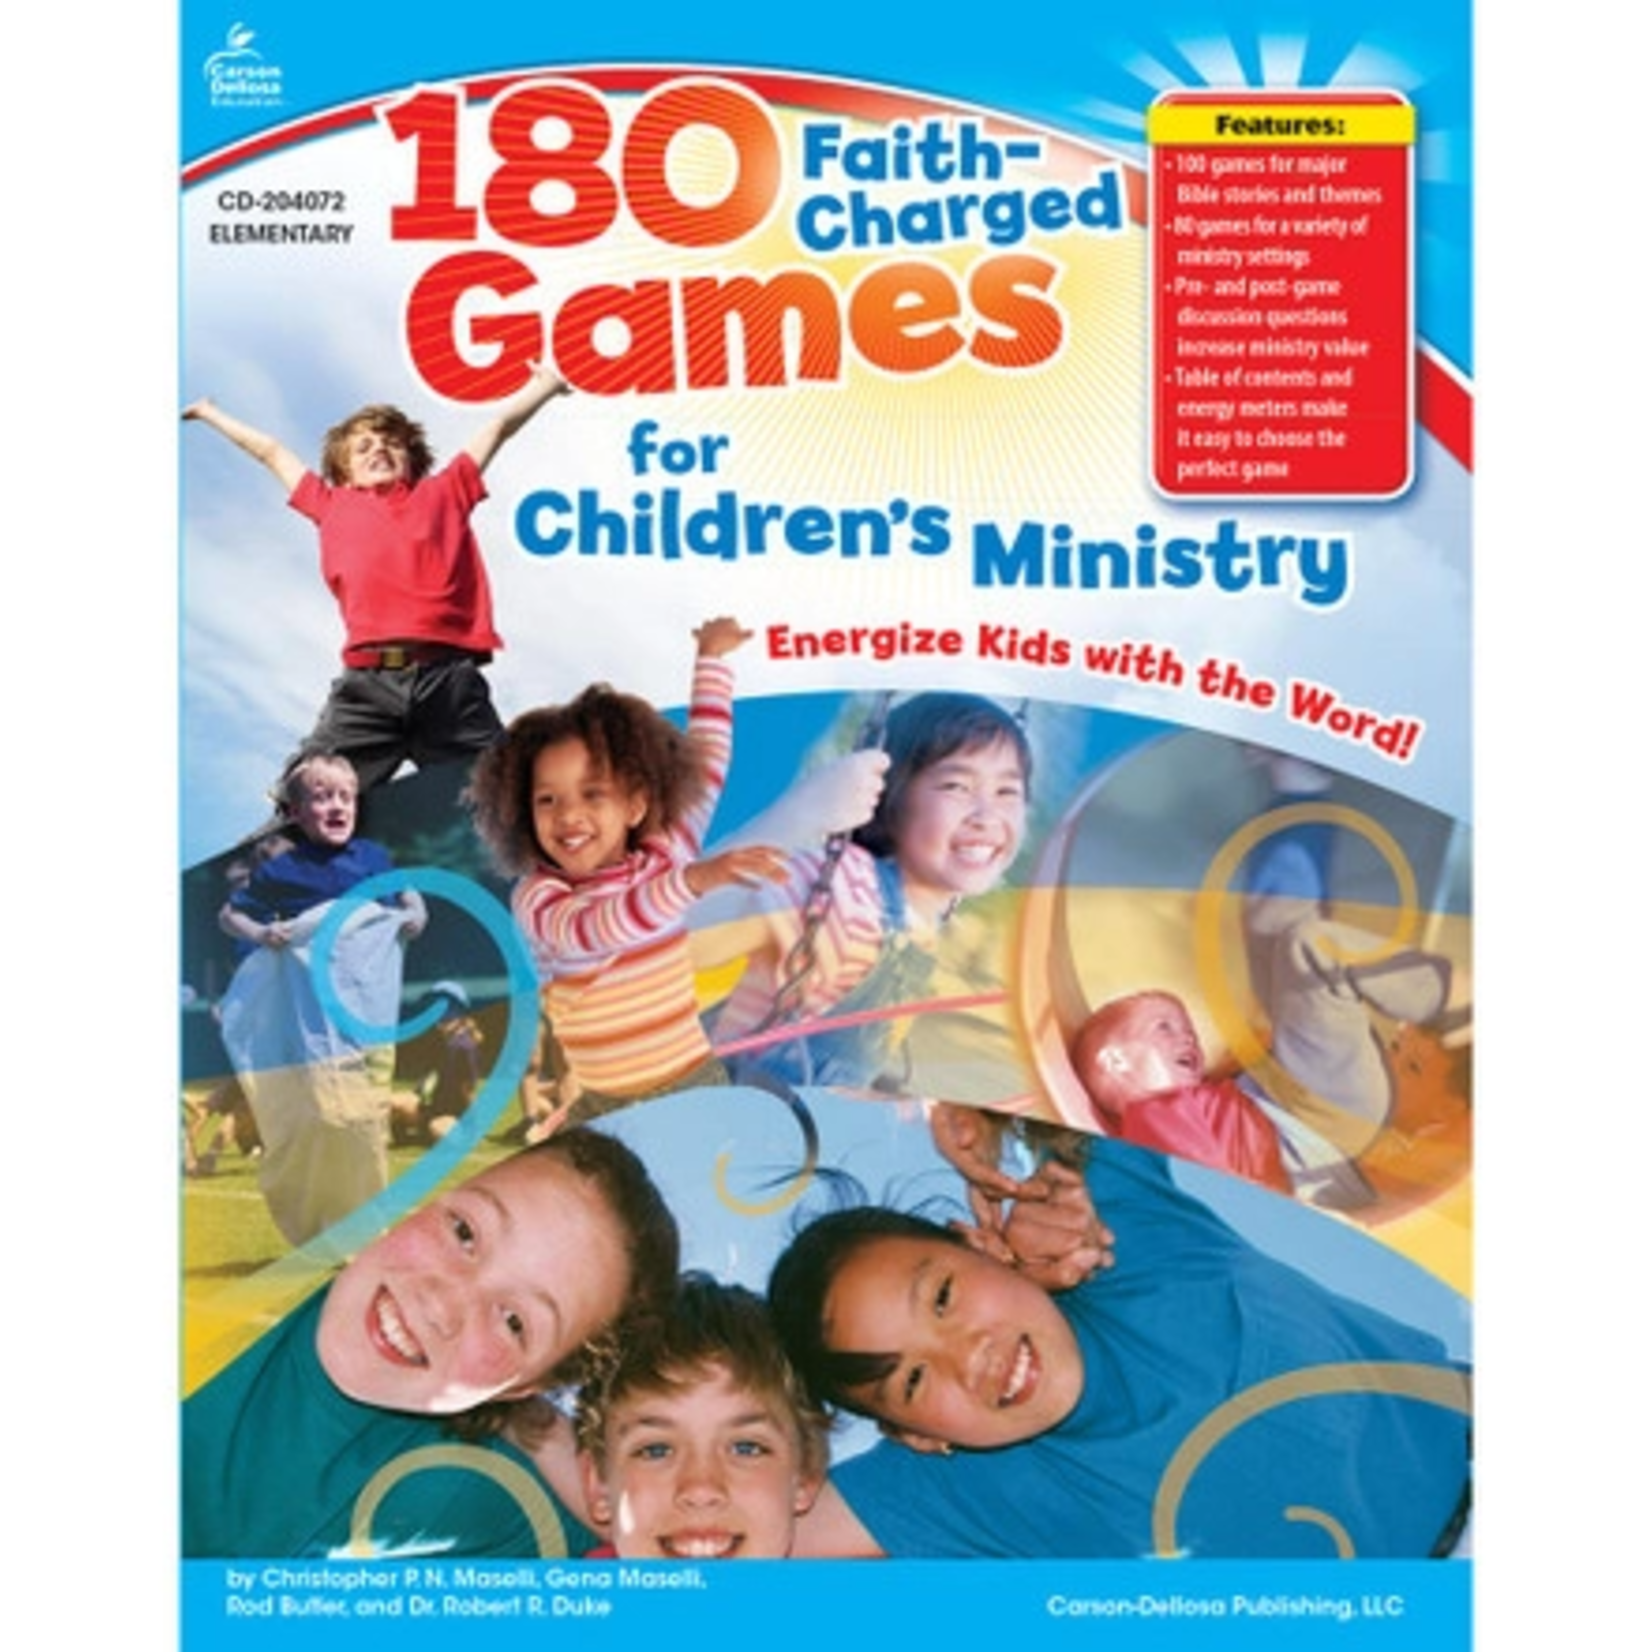 CARSON DELLOSA PUBLISHING CO 180 Faith-Charged Games for Children’s Ministry Resource Book Grade K-5 Paperback